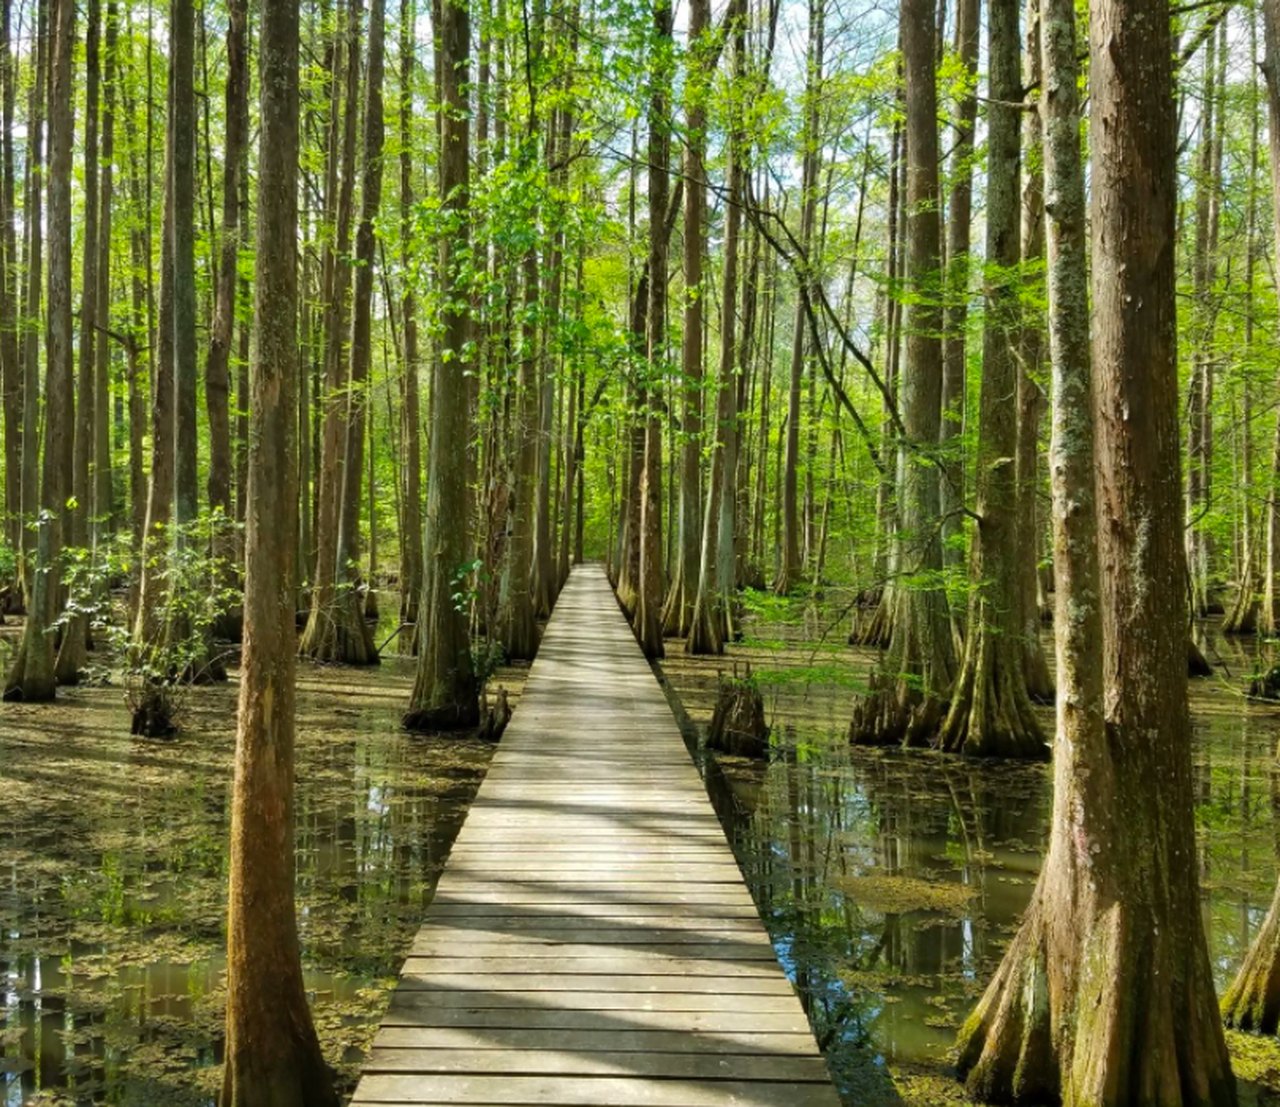 The Trail At Chicot State Park Will Lead You On An Enchanting Journey